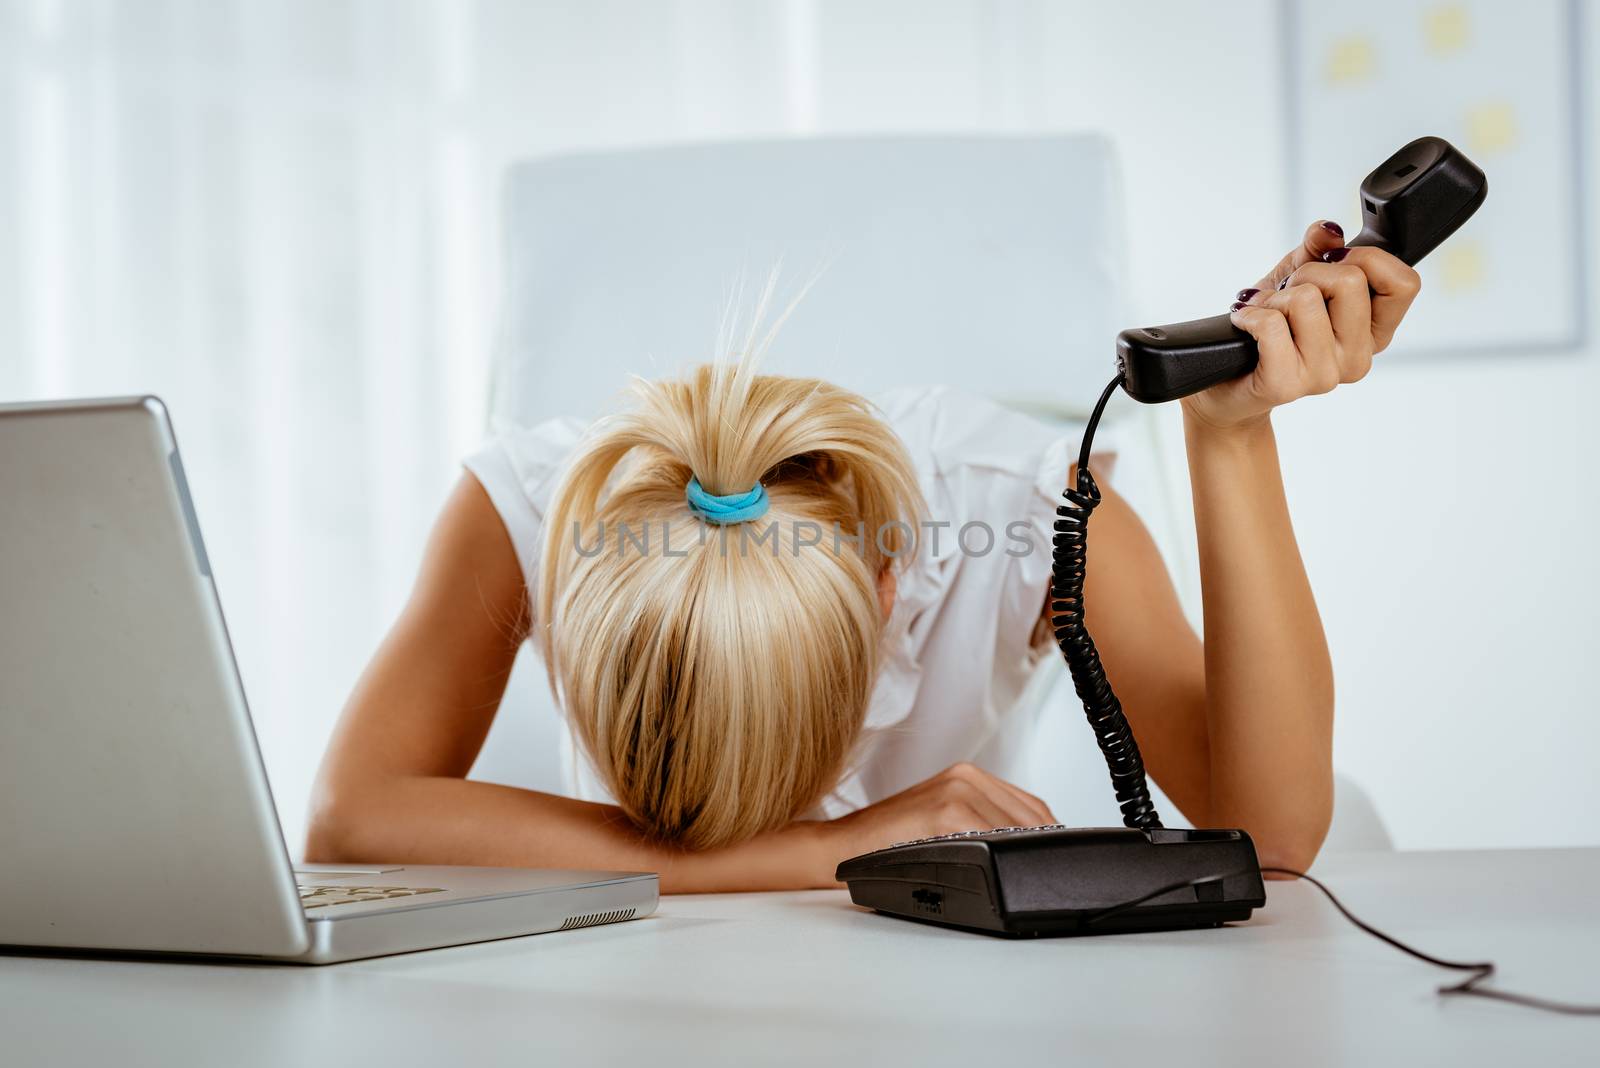 Young business woman napping in the office, on her desk, with a telephone handset on hand, next to laptop.